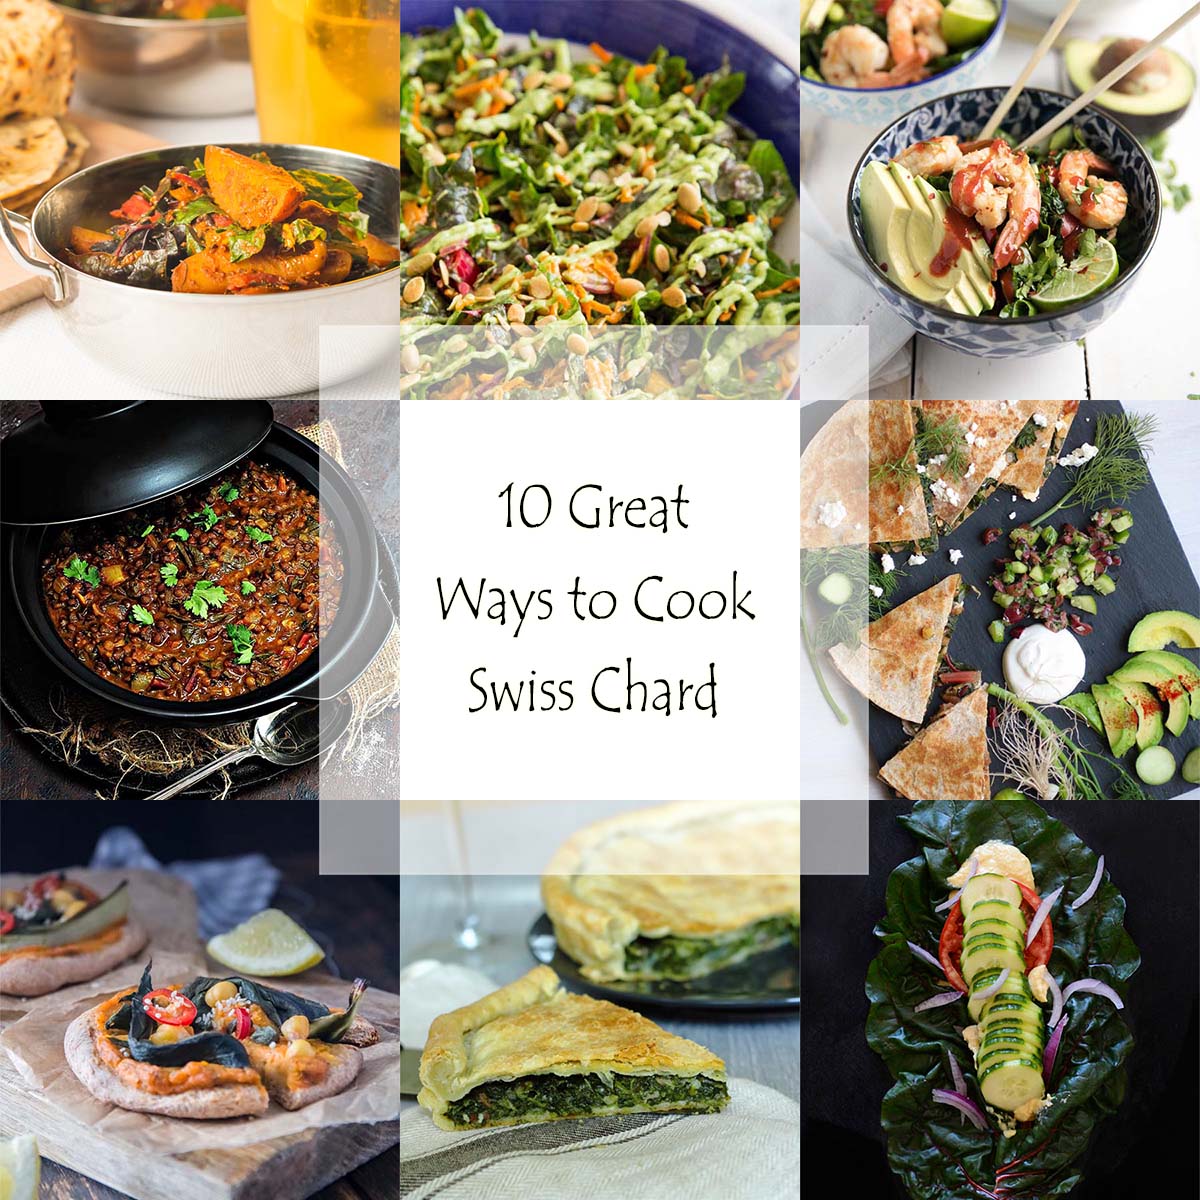 Looking for some new ways to cook Swiss chard? I have here a great roundup of interesting recipes for taking Swiss chard beyond the saute. | justalittlebitofbacon.com